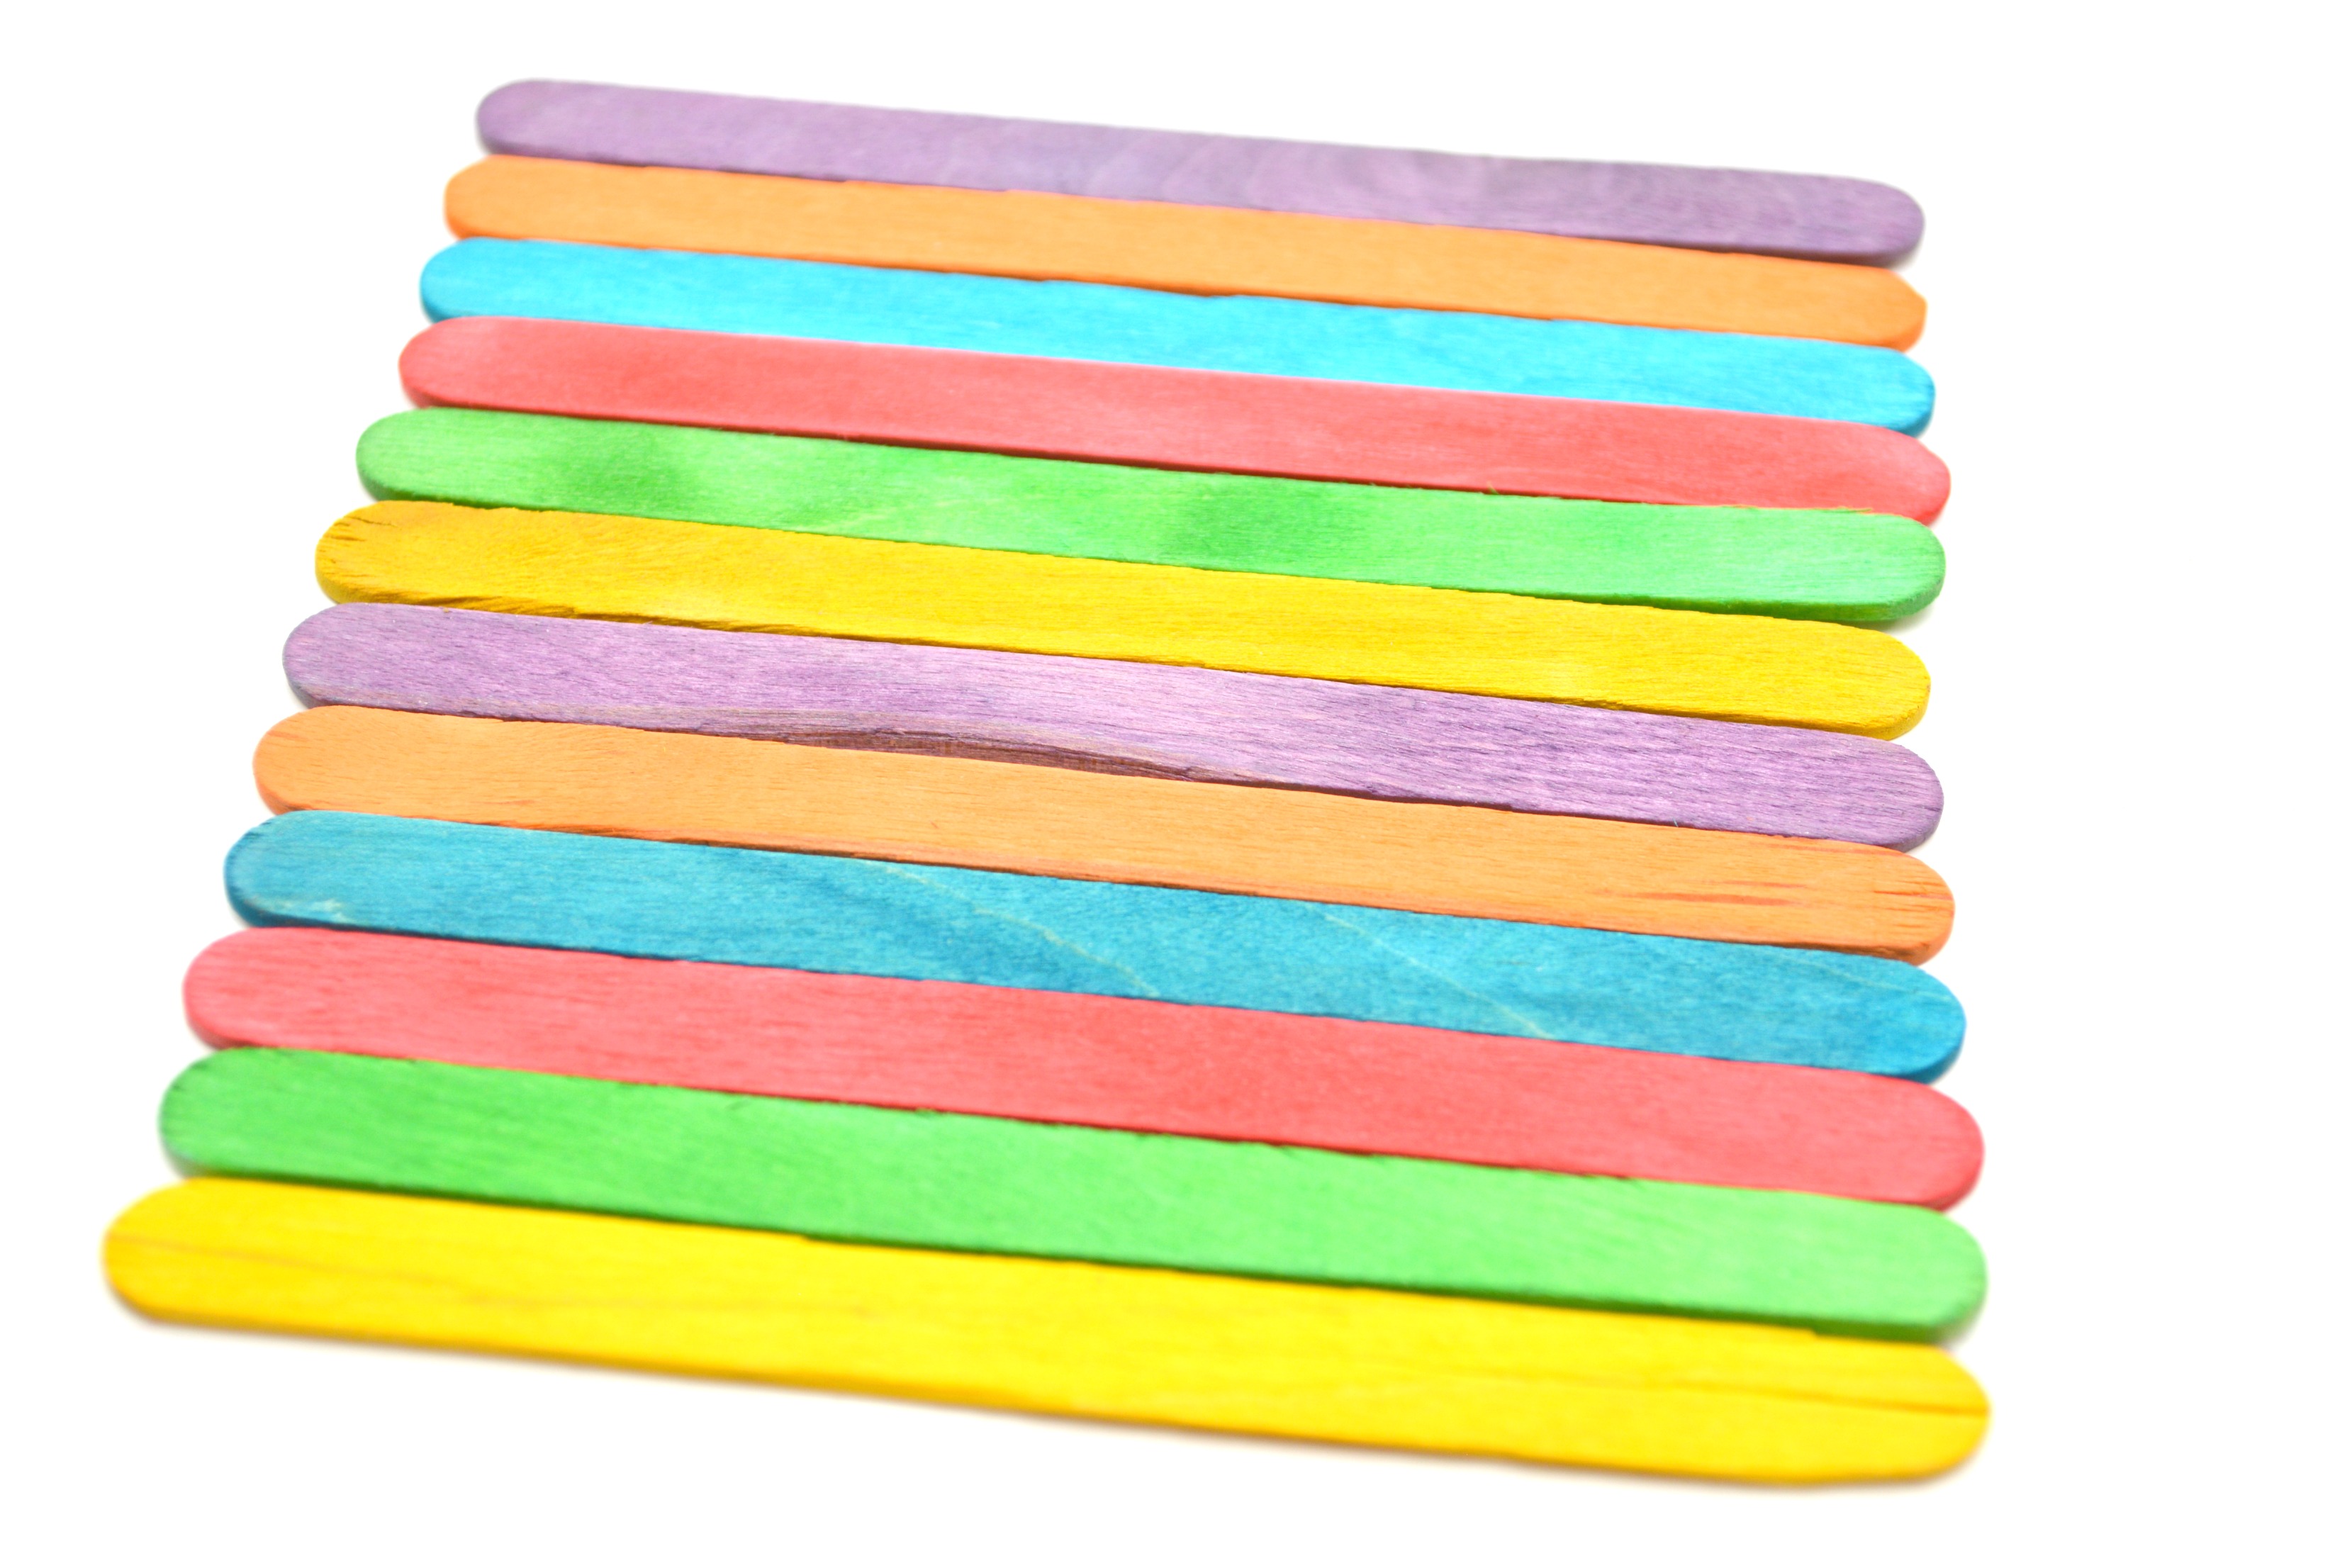 Spring Cookie Cutter Popsicle Stick Puzzle - PocketOT